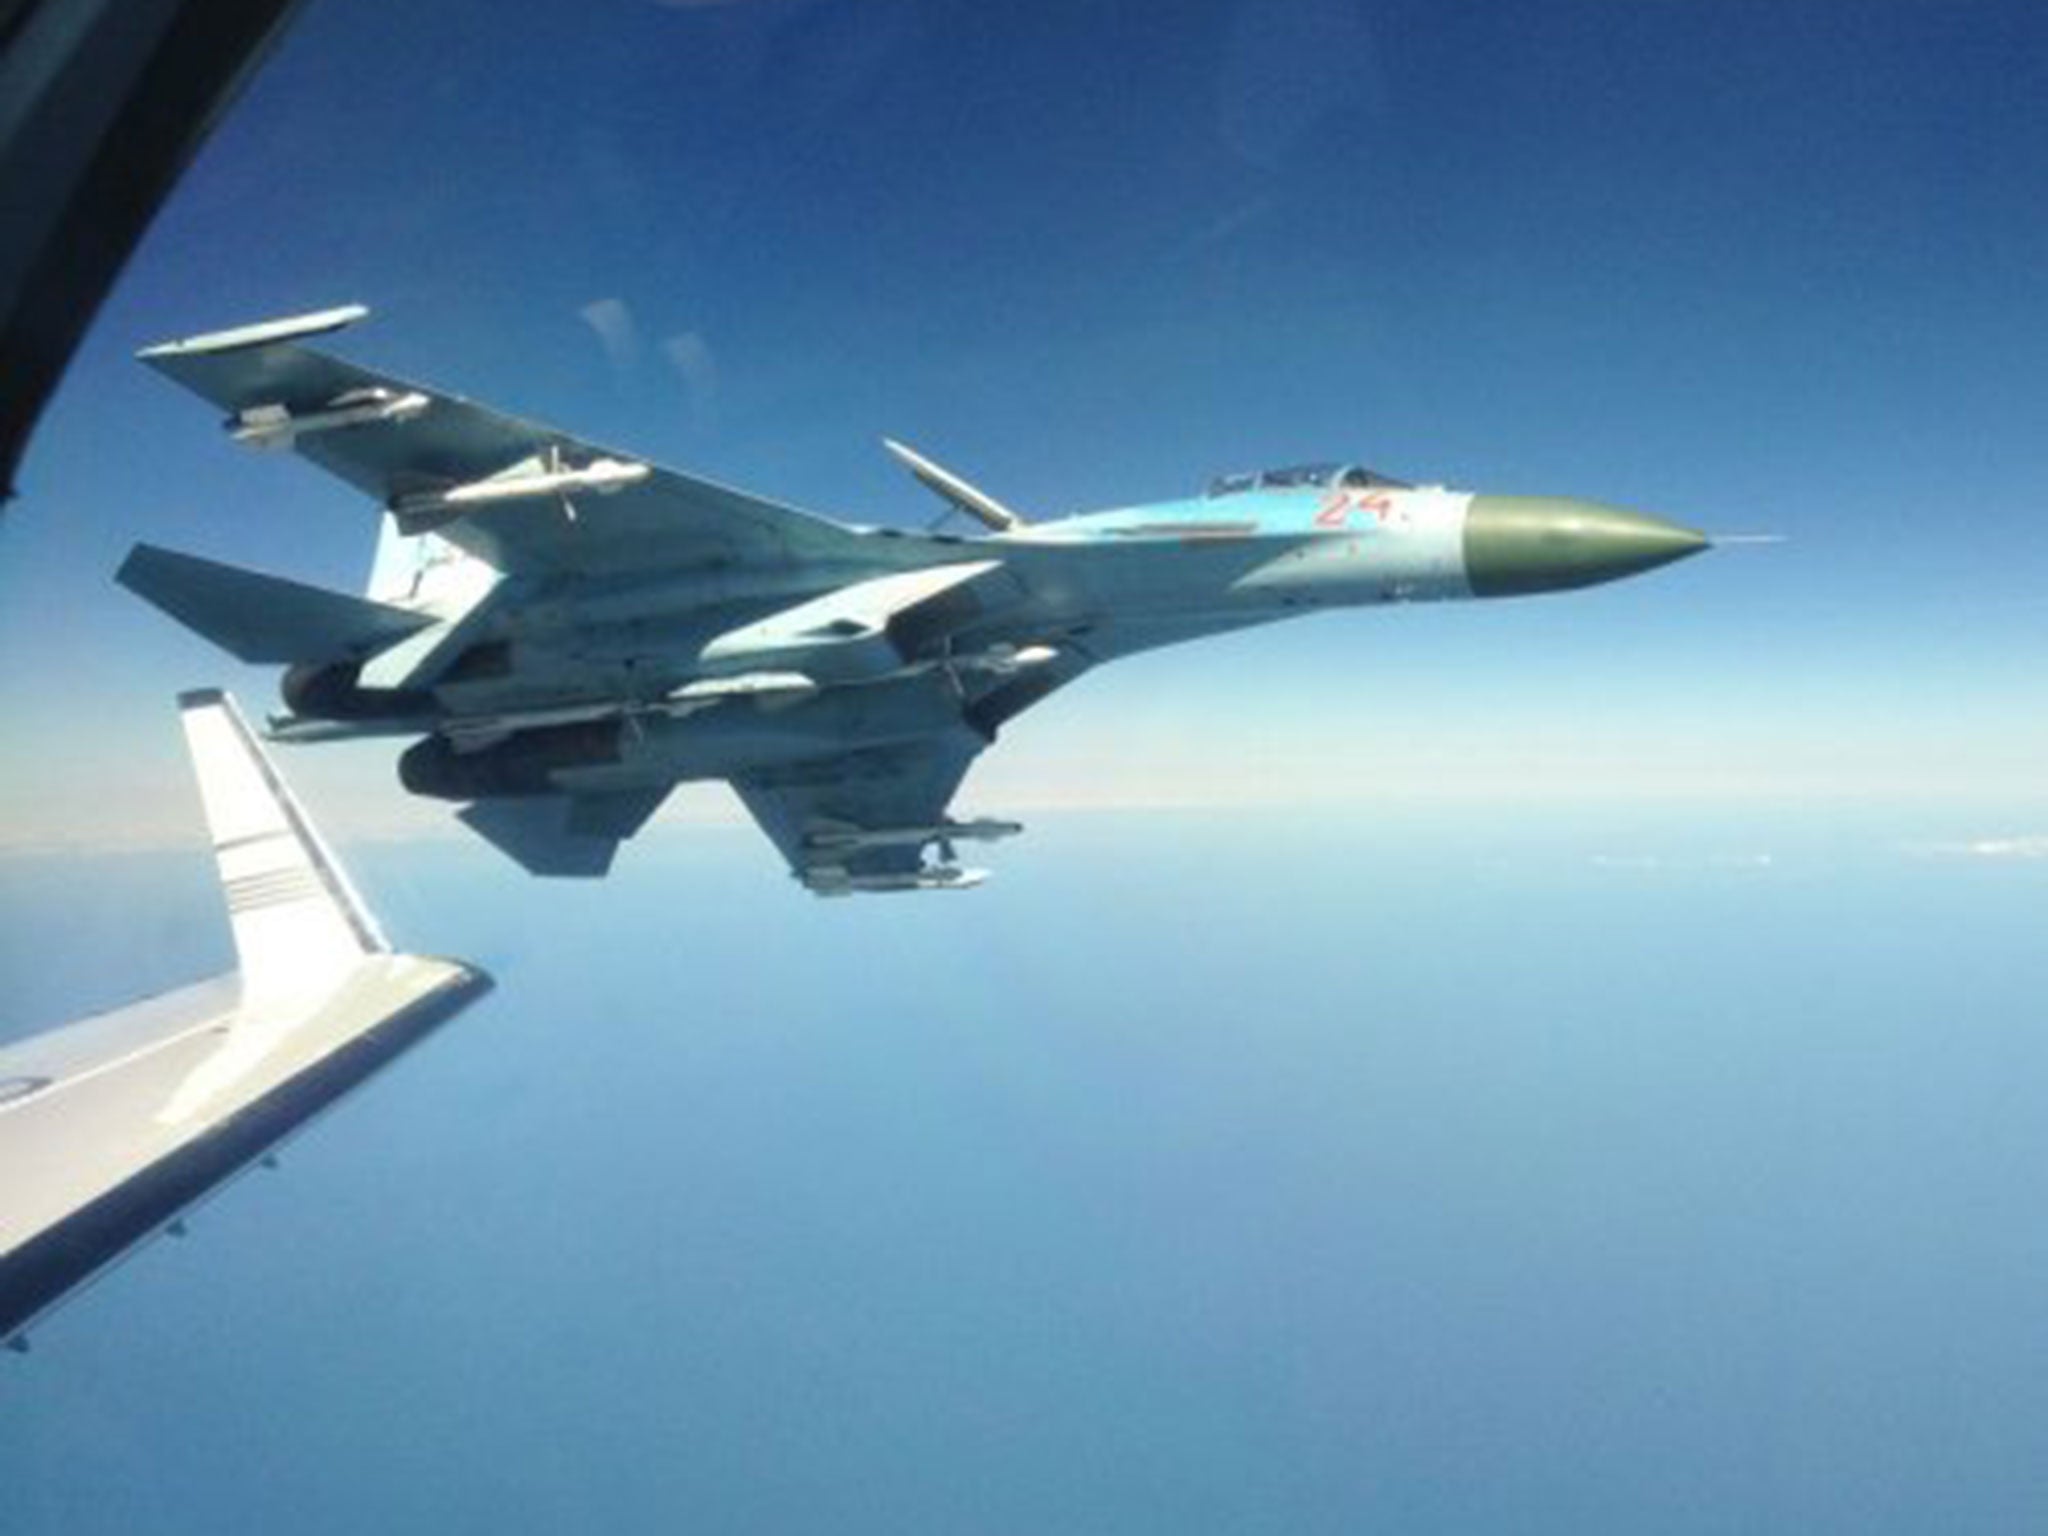 A Russian su-27 fighter jet photographed next to a Swedish intelligence plane in 2014